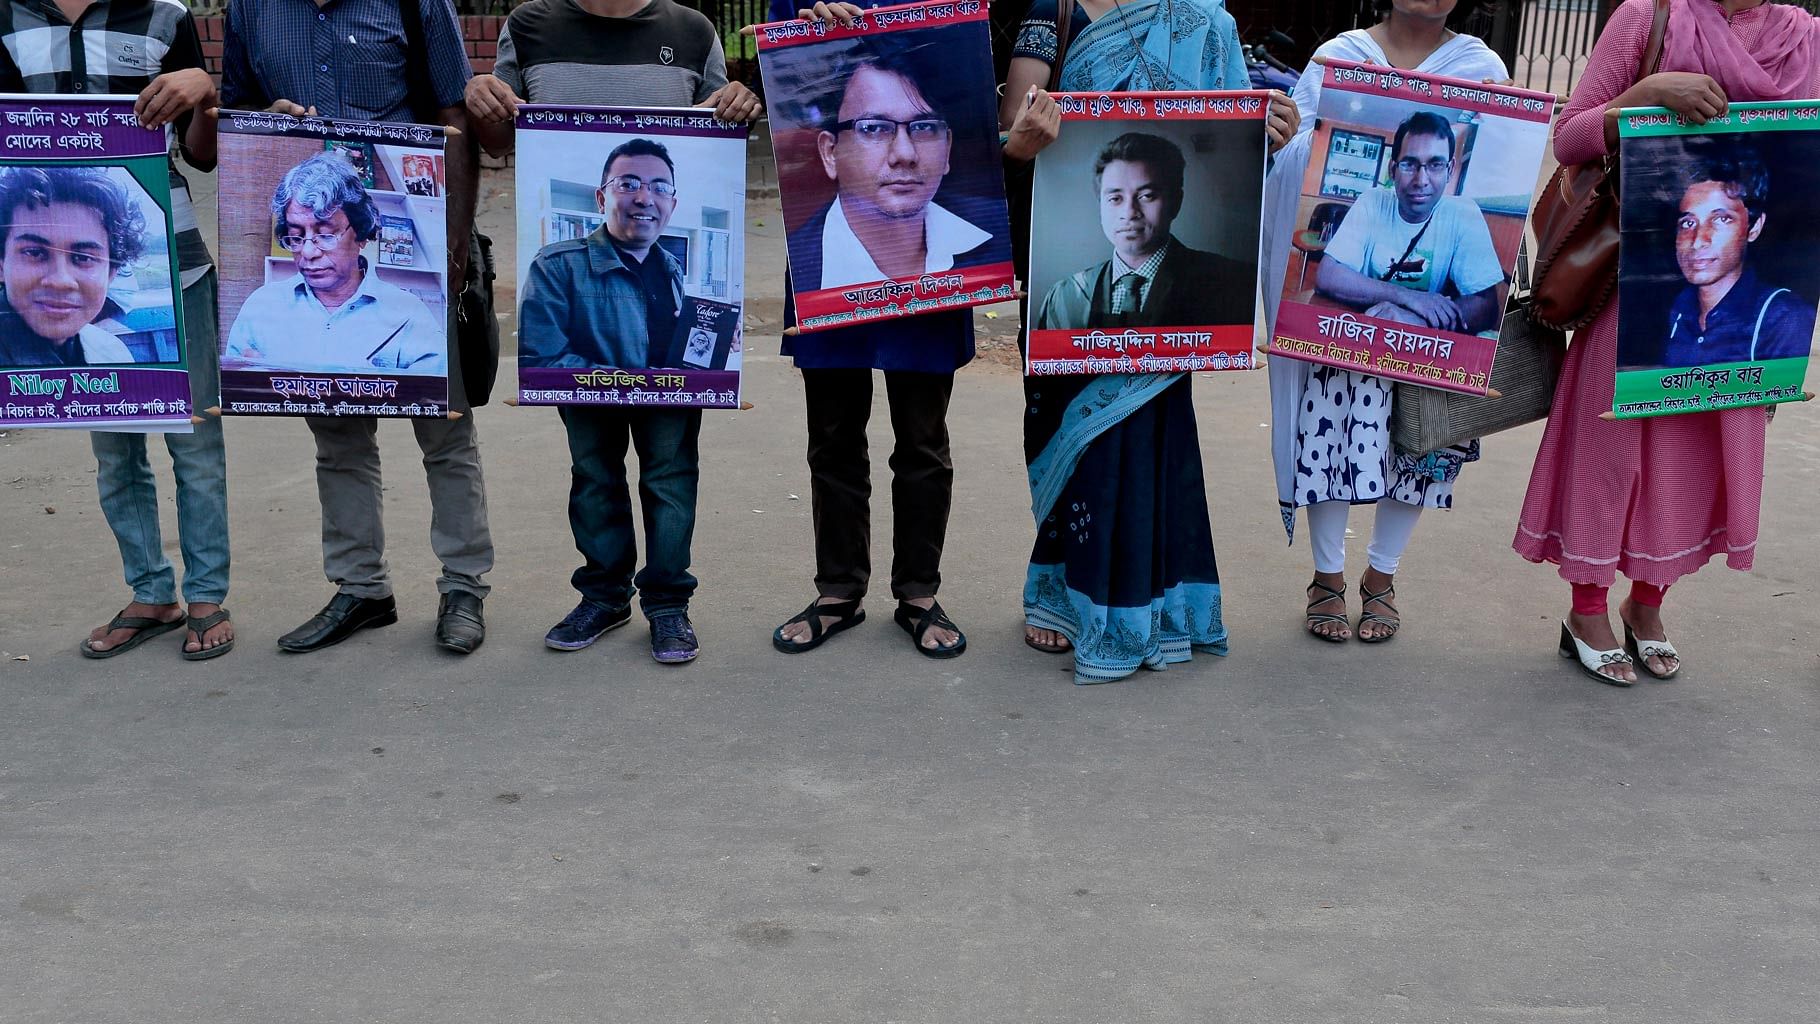 Bangladeshi social activists hold portraits of those hacked to death in the last few year in Bangladesh. (Photo: AP)